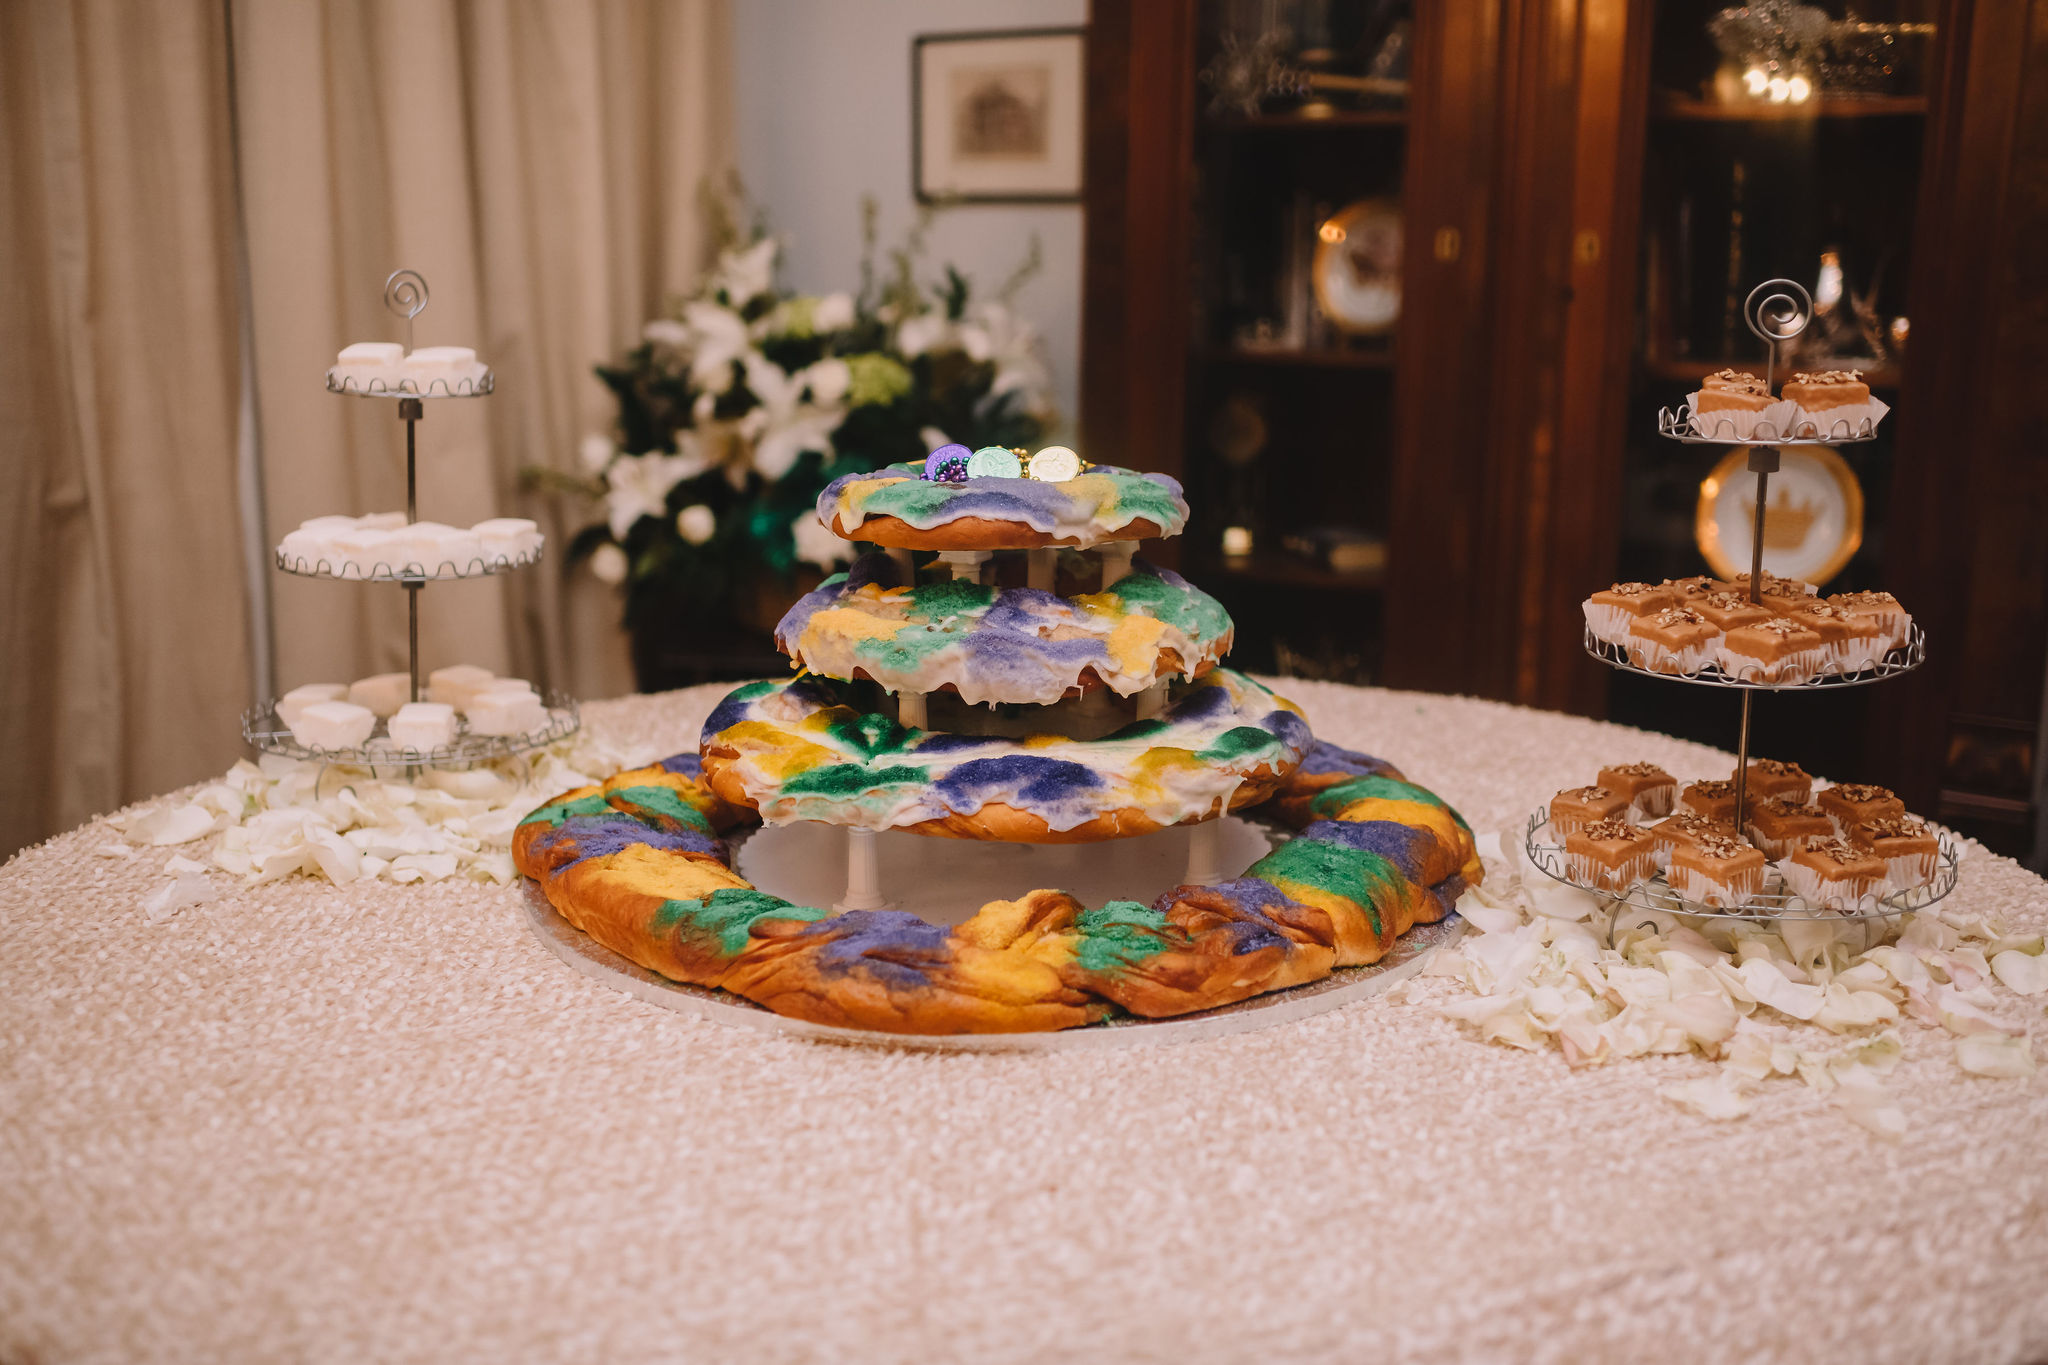 Instead of a traditional wedding cake, Rachel and Jimmy treated their guests to a four tier king cake and petit fours from Haydel's Bakery.